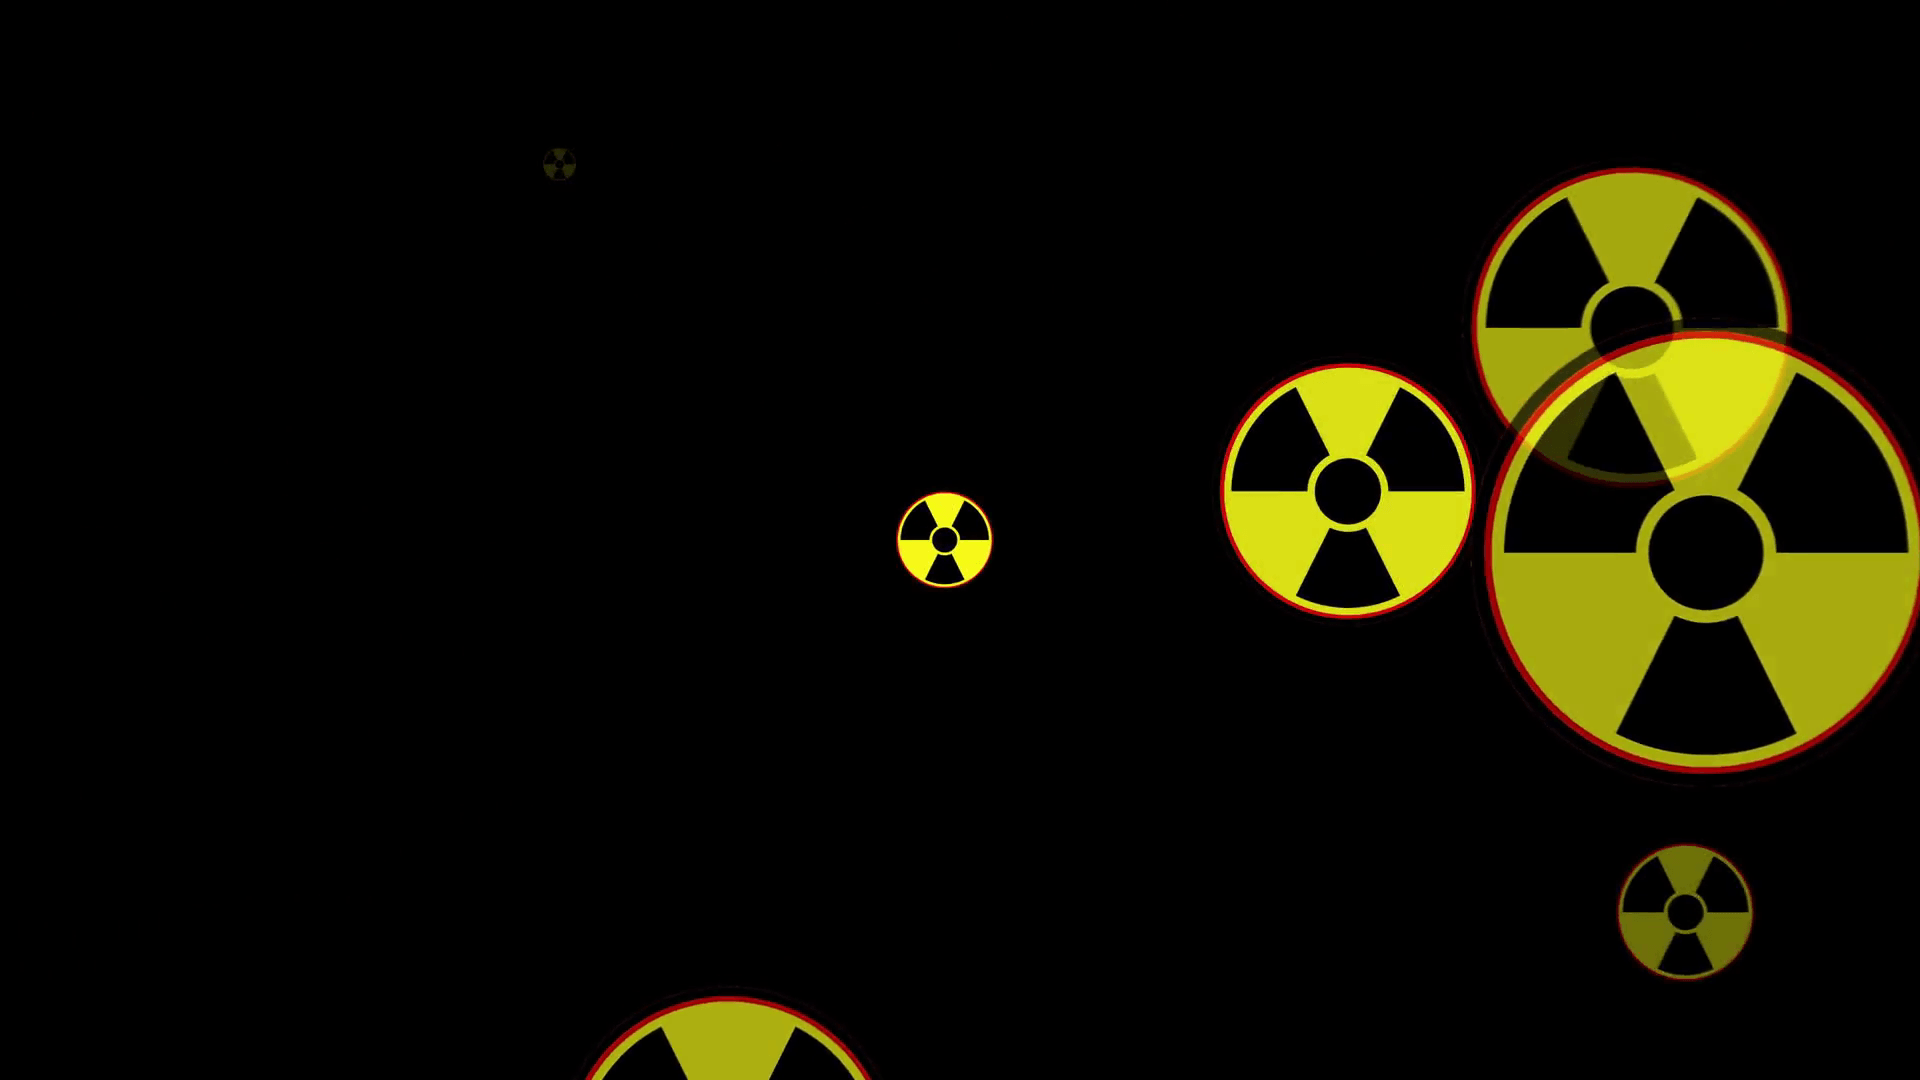 Radioactive danger sign. Many of the radiation warning signs are